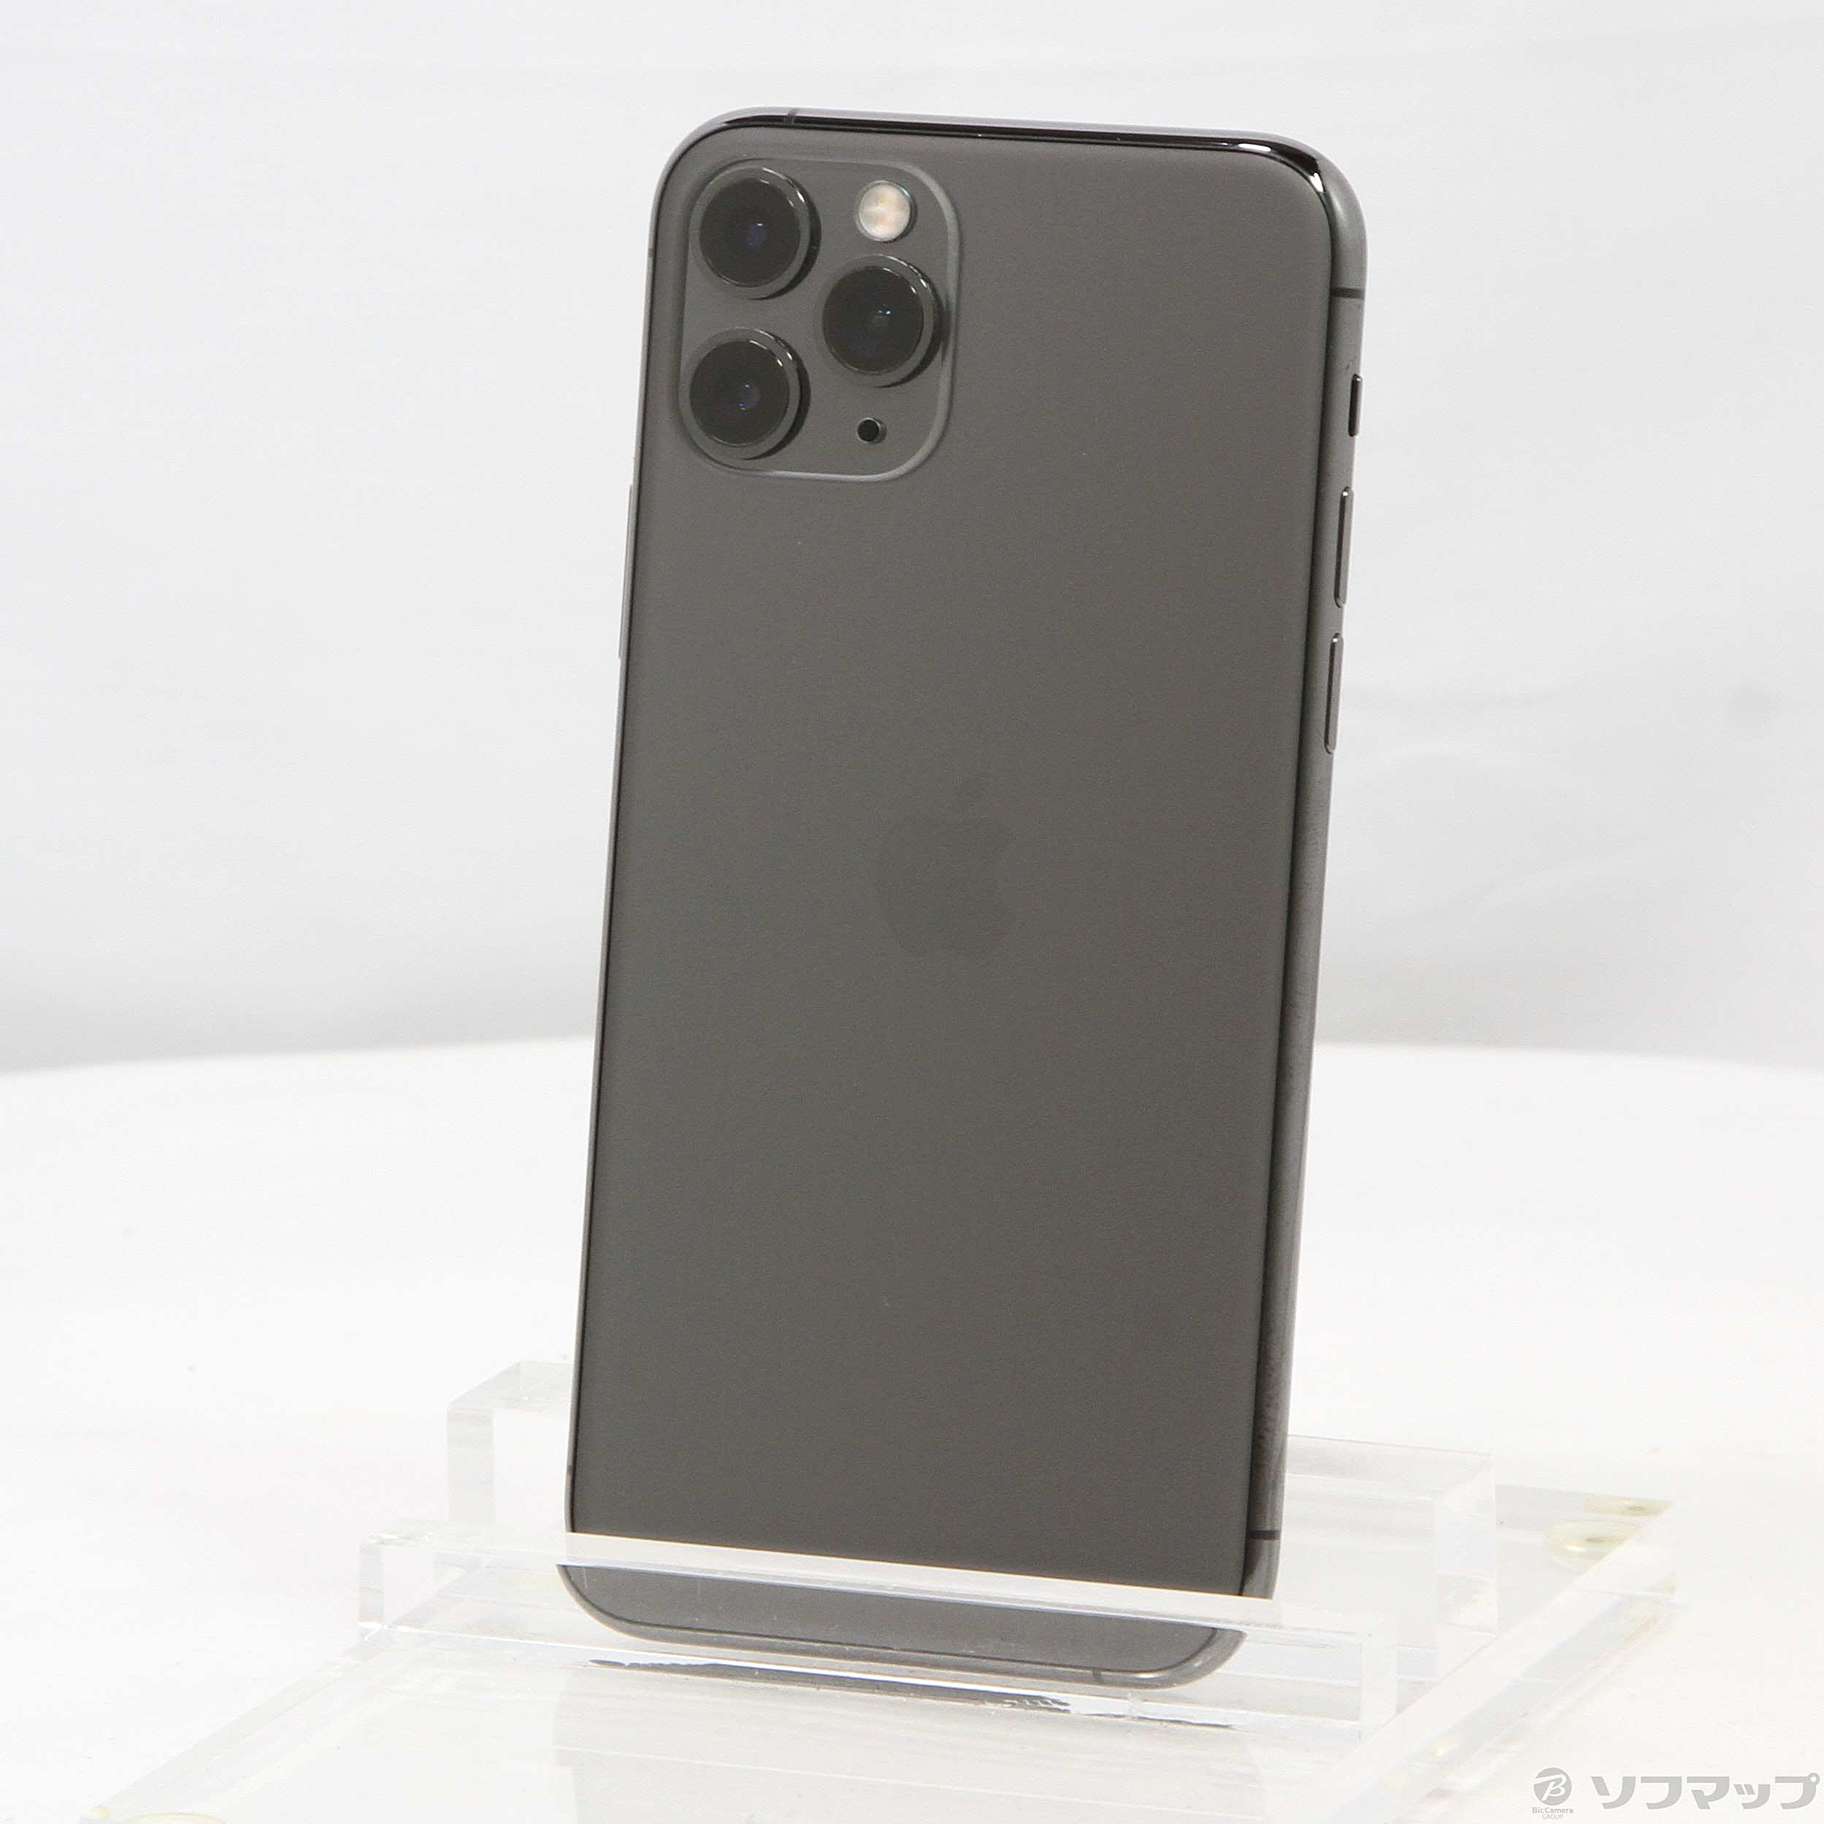 iPhone 11 Pro 256GB / Space Gray